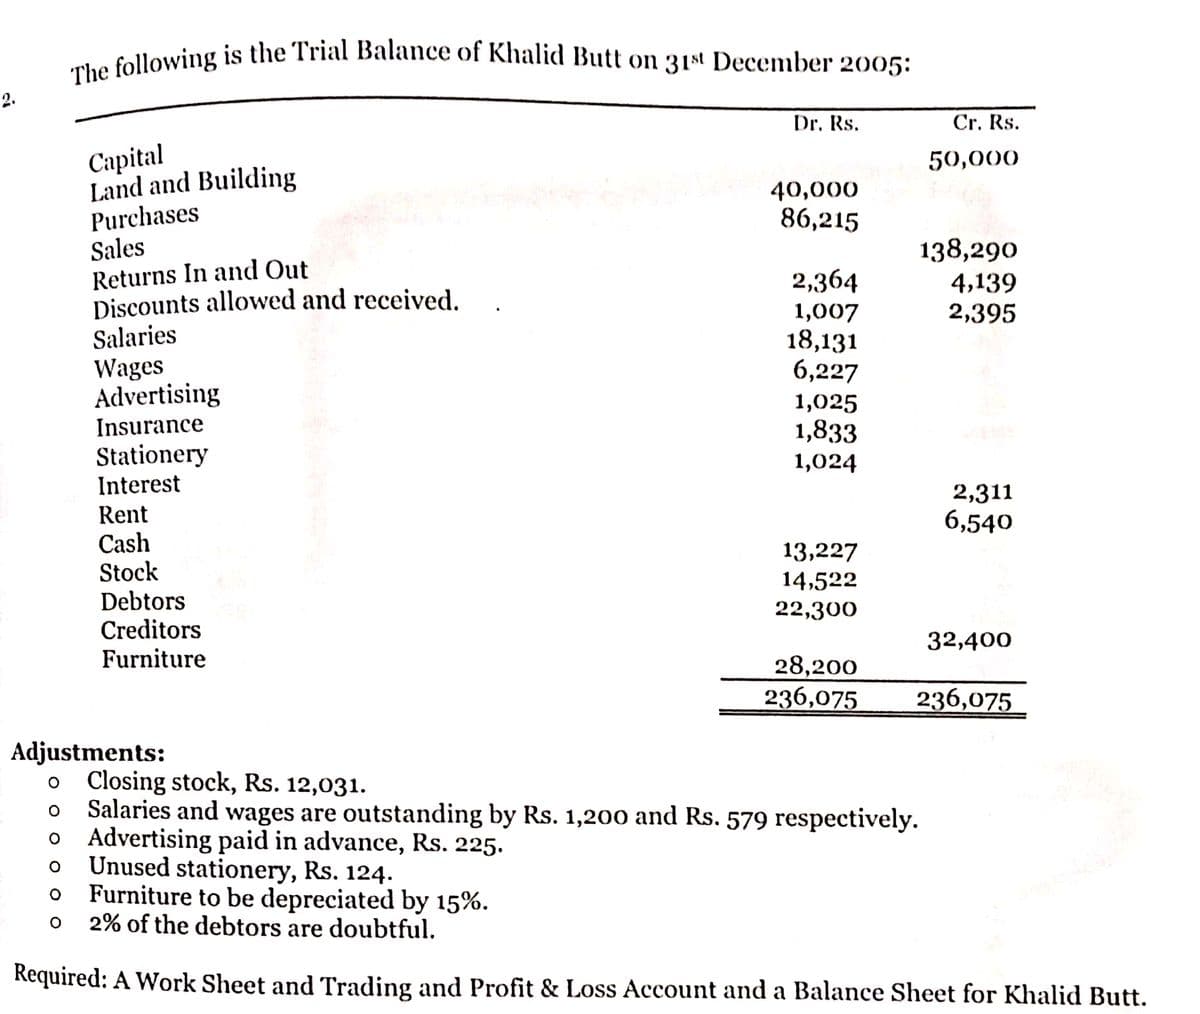 2.
The following is the Trial Balance of Khalid Butt on 31st December 2005:
Capital
Land and Building
Purchases
Sales
Returns In and Out
Discounts allowed and received.
Salaries
Wages
Advertising
Insurance
Stationery
Interest
Rent
Cash
Stock
Debtors
Creditors
Furniture
Adjustments:
Dr. Rs.
40,000
86,215
2,364
1,007
18,131
6,227
1,025
1,833
1,024
13,227
14,522
22,300
28,200
236,075
Cr. Rs.
50,000
138,290
4,139
2,395
2,311
6,540
32,400
236,075
o Closing stock, Rs. 12,031.
O Salaries and wages are outstanding by Rs. 1,200 and Rs. 579 respectively.
o Advertising paid in advance, Rs. 225.
O
Unused stationery, Rs. 124.
O
Furniture to be depreciated by 15%.
O
2% of the debtors are doubtful.
Required: A Work Sheet and Trading and Profit & Loss Account and a Balance Sheet for Khalid Butt.